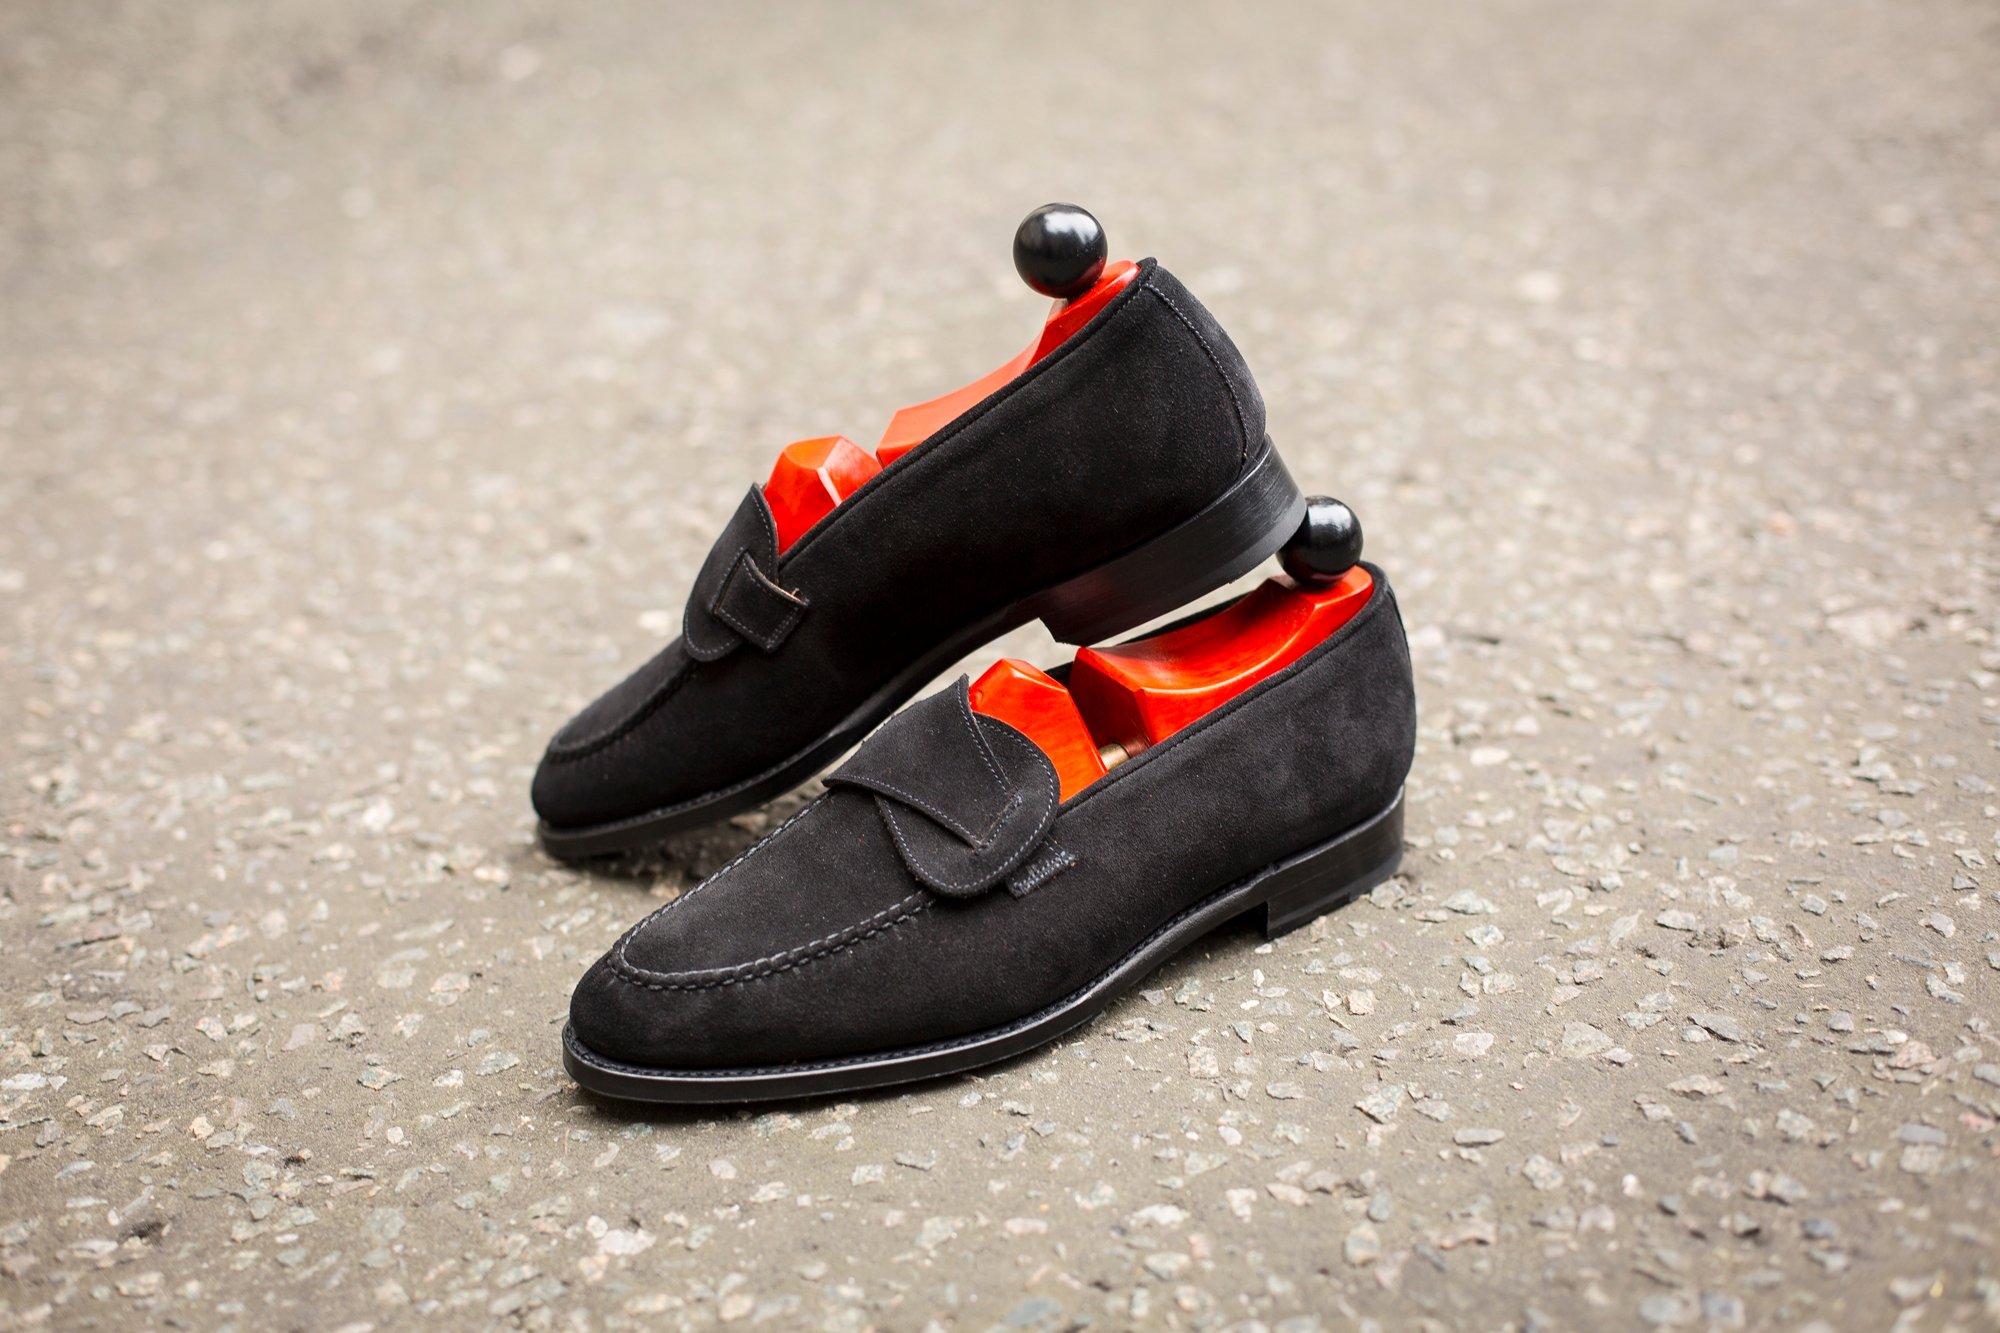 Black Suede Shoes - Where Are They?